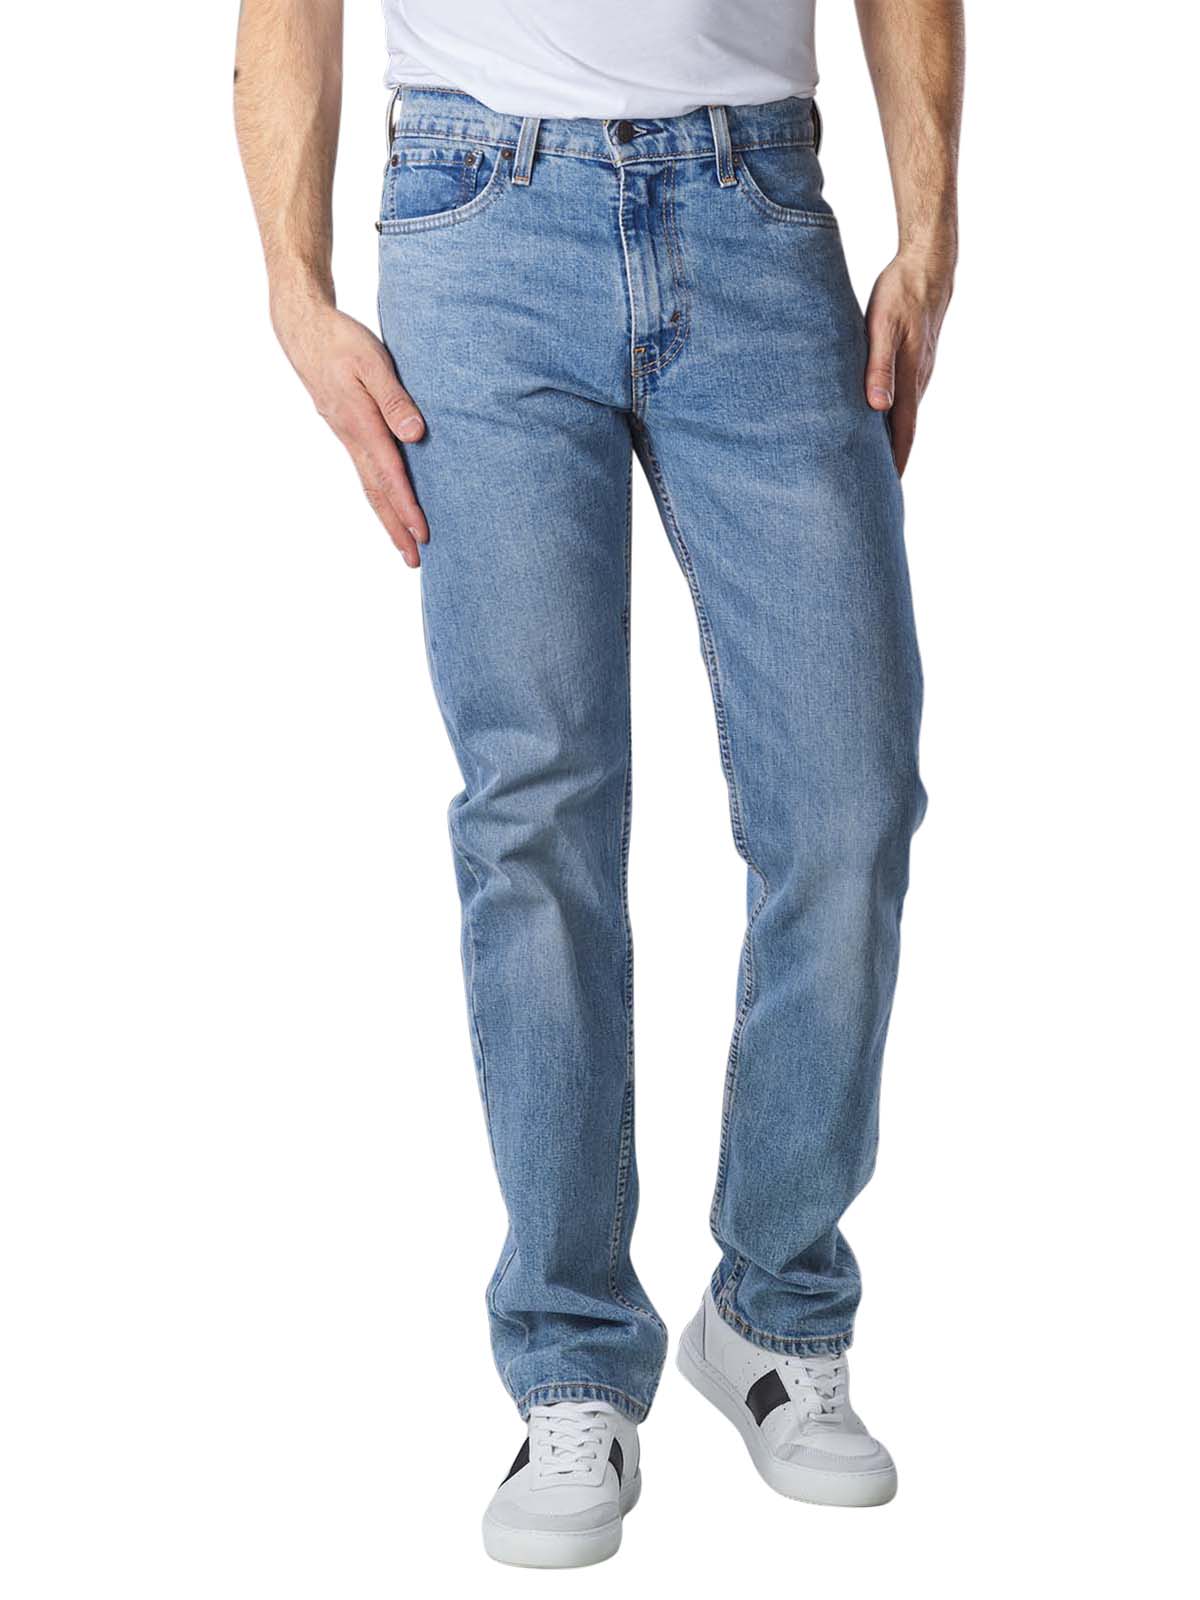 Levi's 505 Jeans Straight Fit clif Levi's Men's Jeans | Free Shipping on   - SIMPLY LOOK GOOD